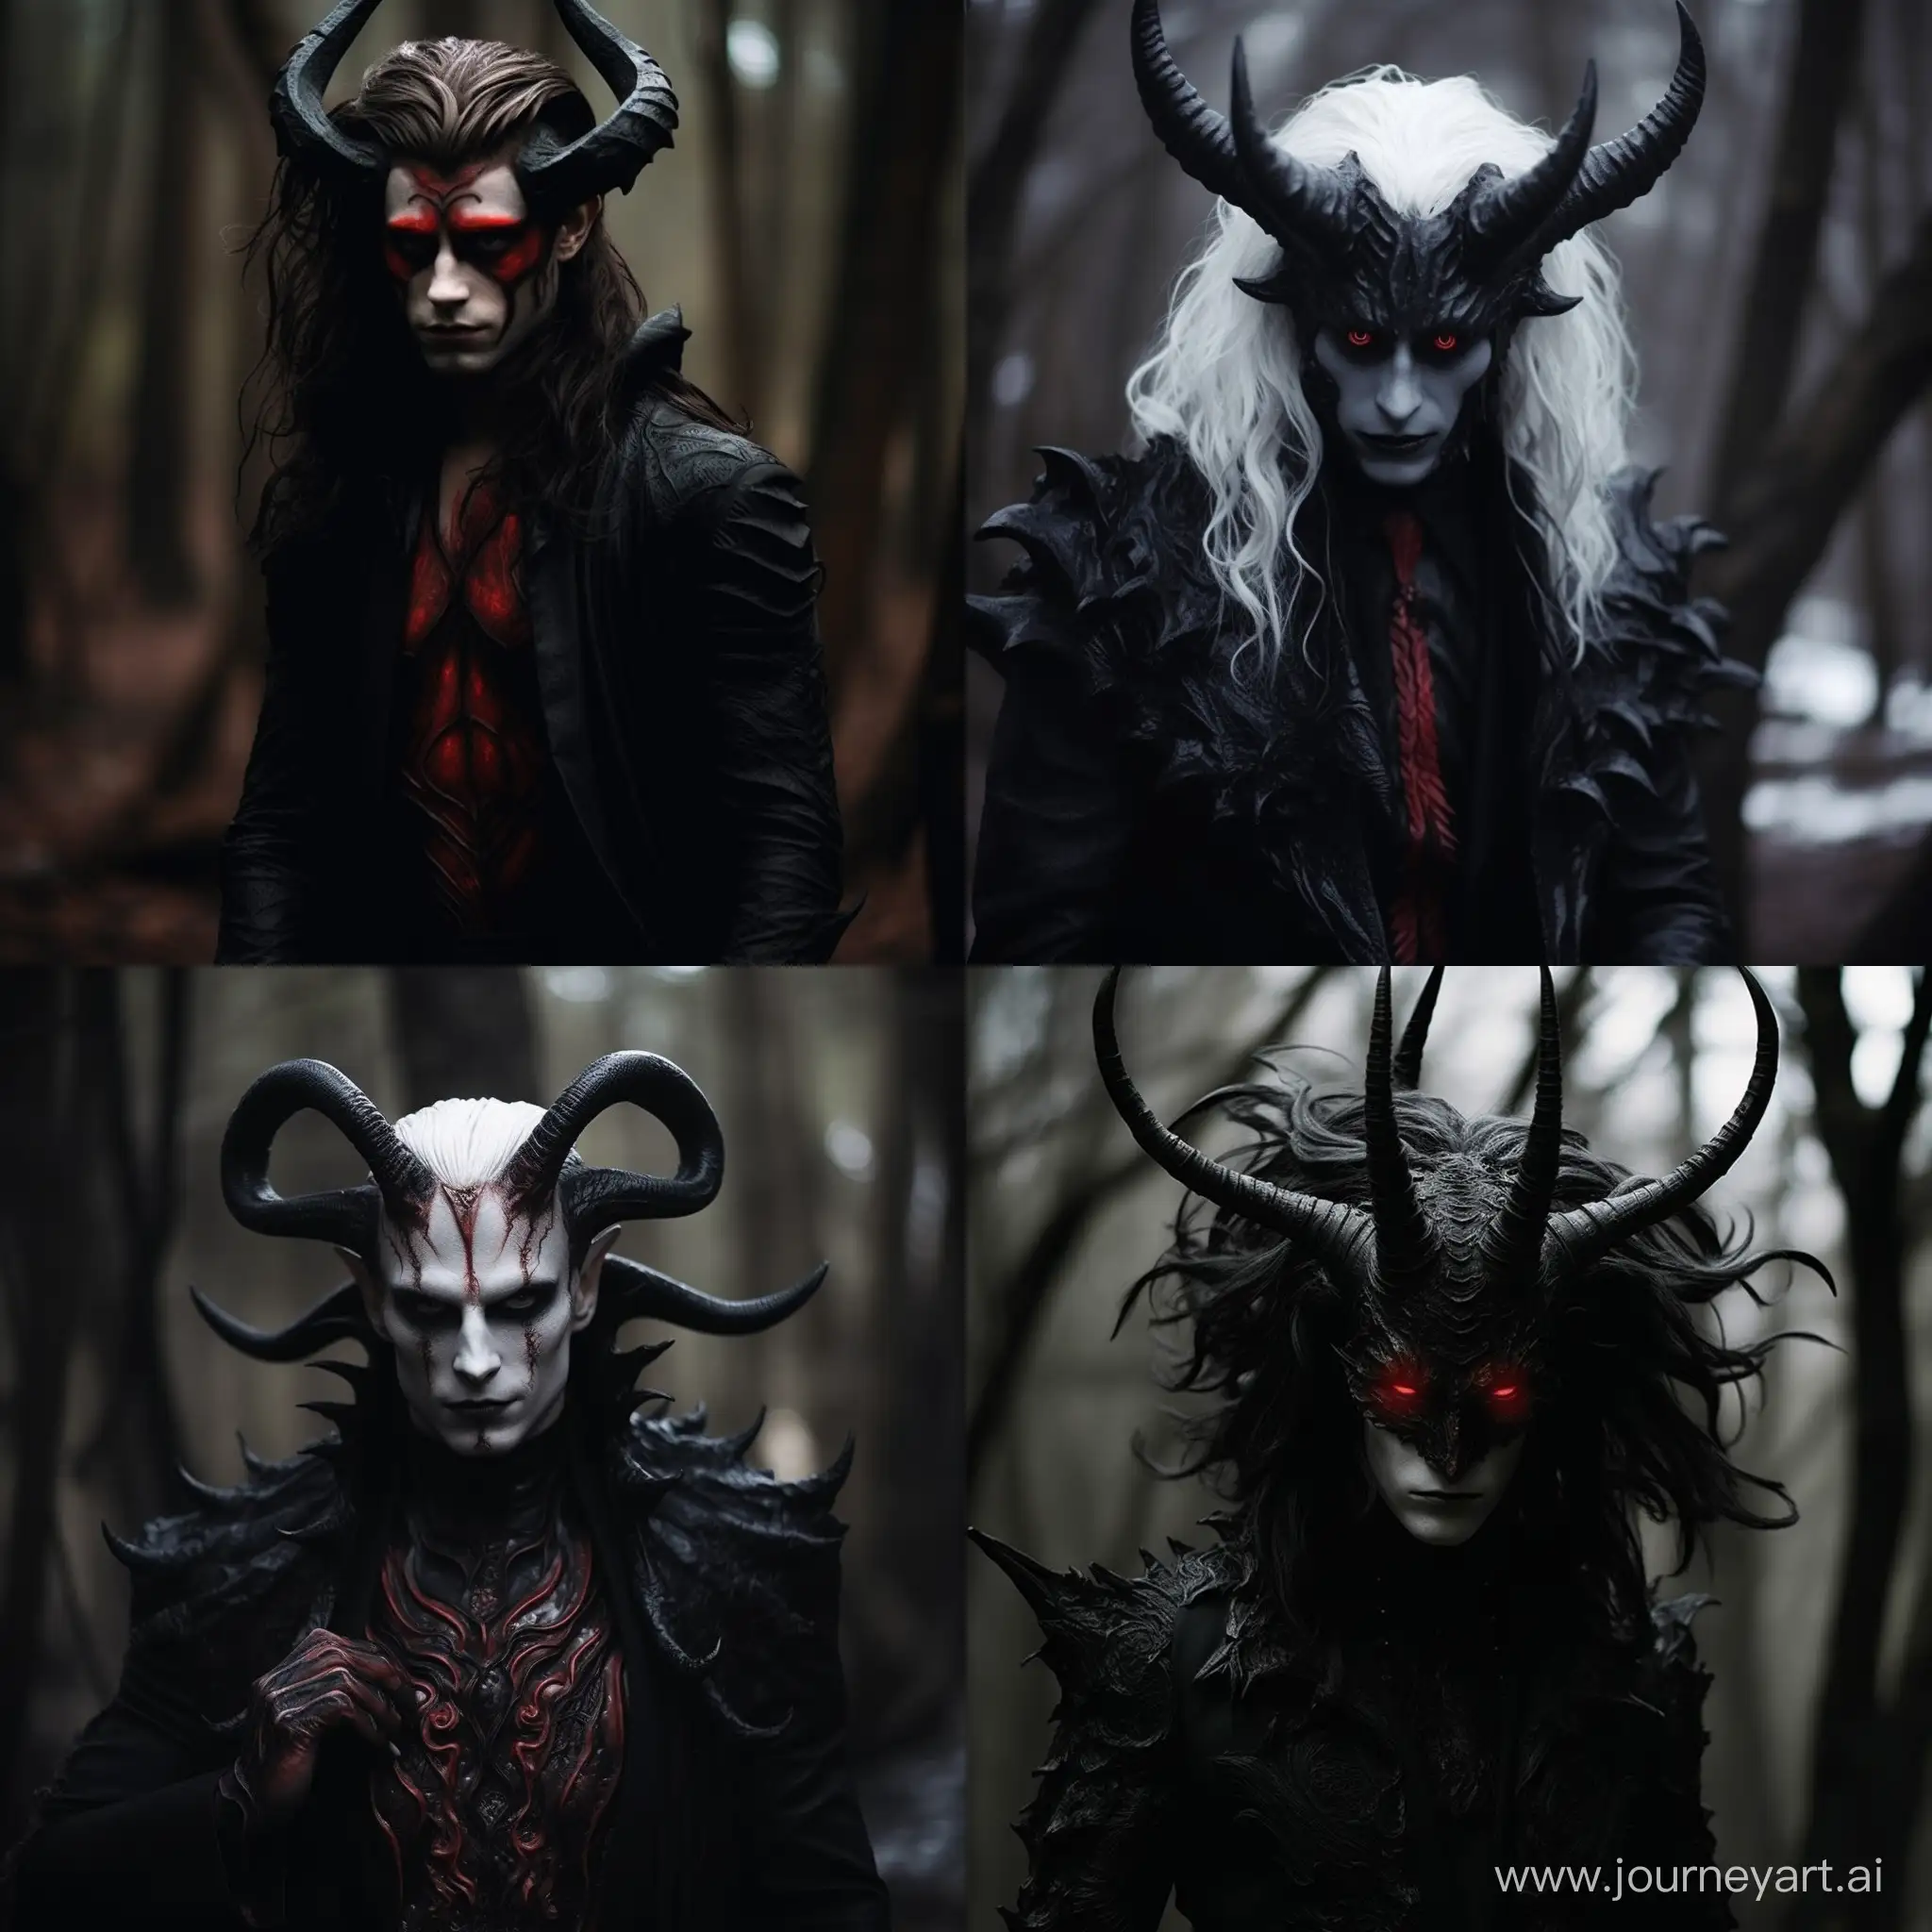 Kind-Black-Devil-in-Red-and-Black-Attire-with-White-Horns